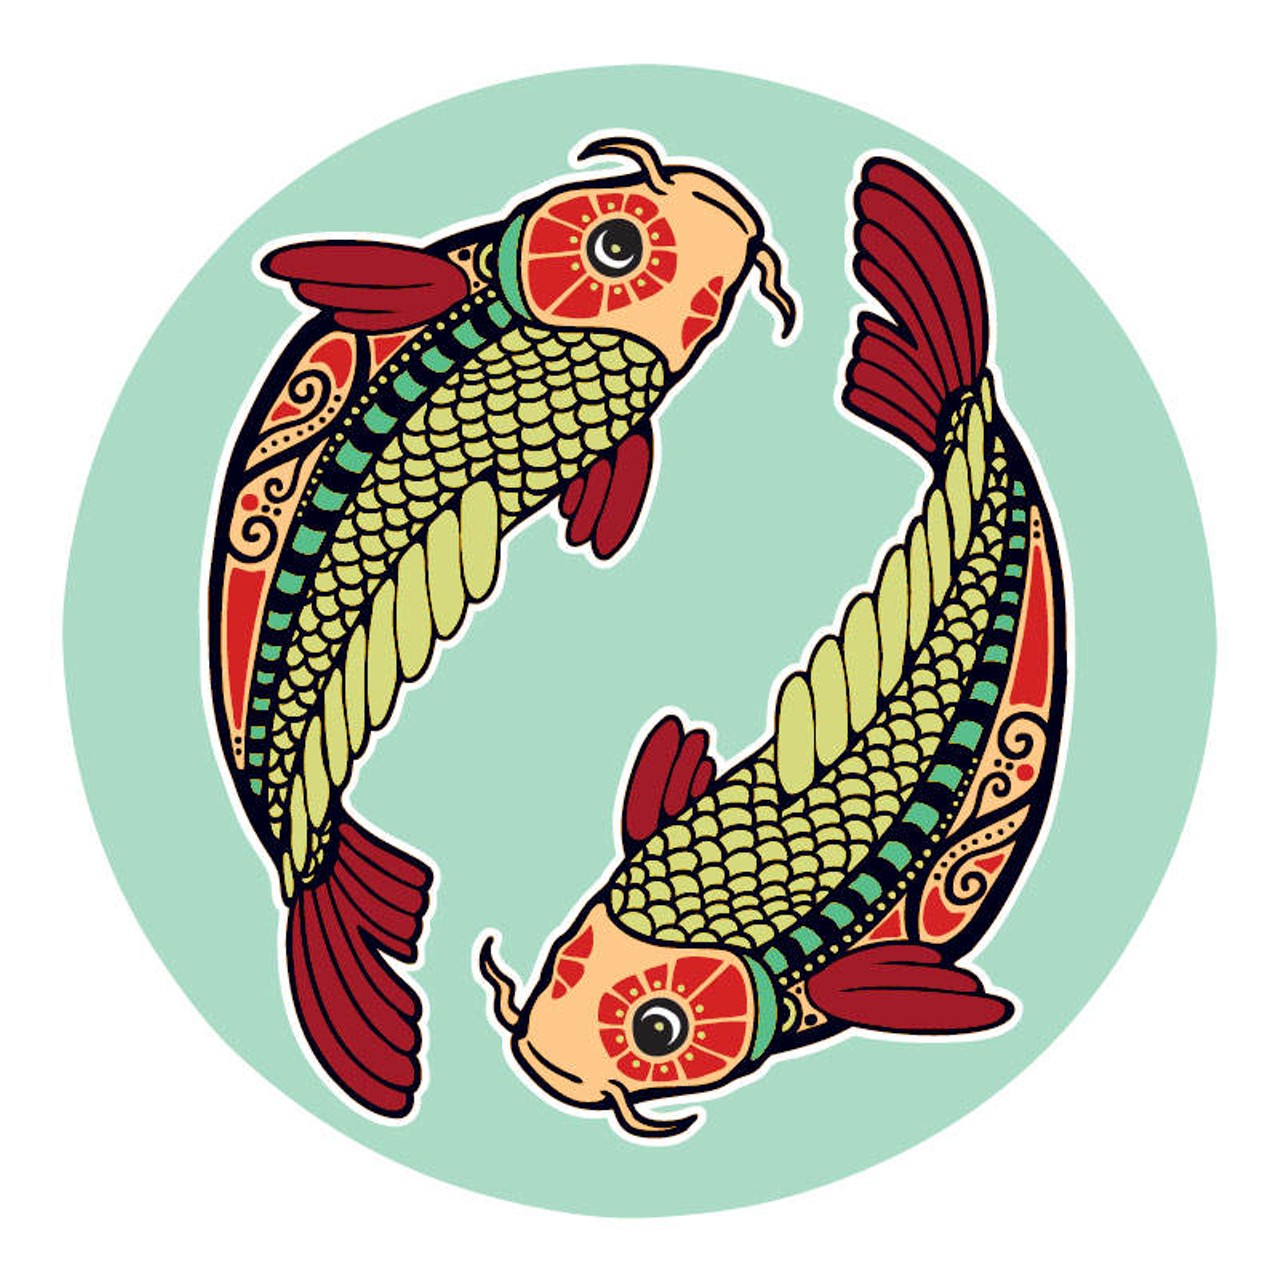 PISCES (Feb. 21-March 20): 
The potential to make it or break it is always there with you guys. Once again, the Gods seem to be calling you out, or begging you to prove yourself on a thousand different levels. If you look at your situation with ordinary eyes you will get nowhere. Underneath the storyline, this is the point where you finally crack the code on what it will take for you to go places, or remain stuck here. Don&#146;t worry too much about whether you&#146;re getting it right or making a mess of things. When one is walking the line, it&#146;s all about remaining truthful, and knowing that your life depends on it.